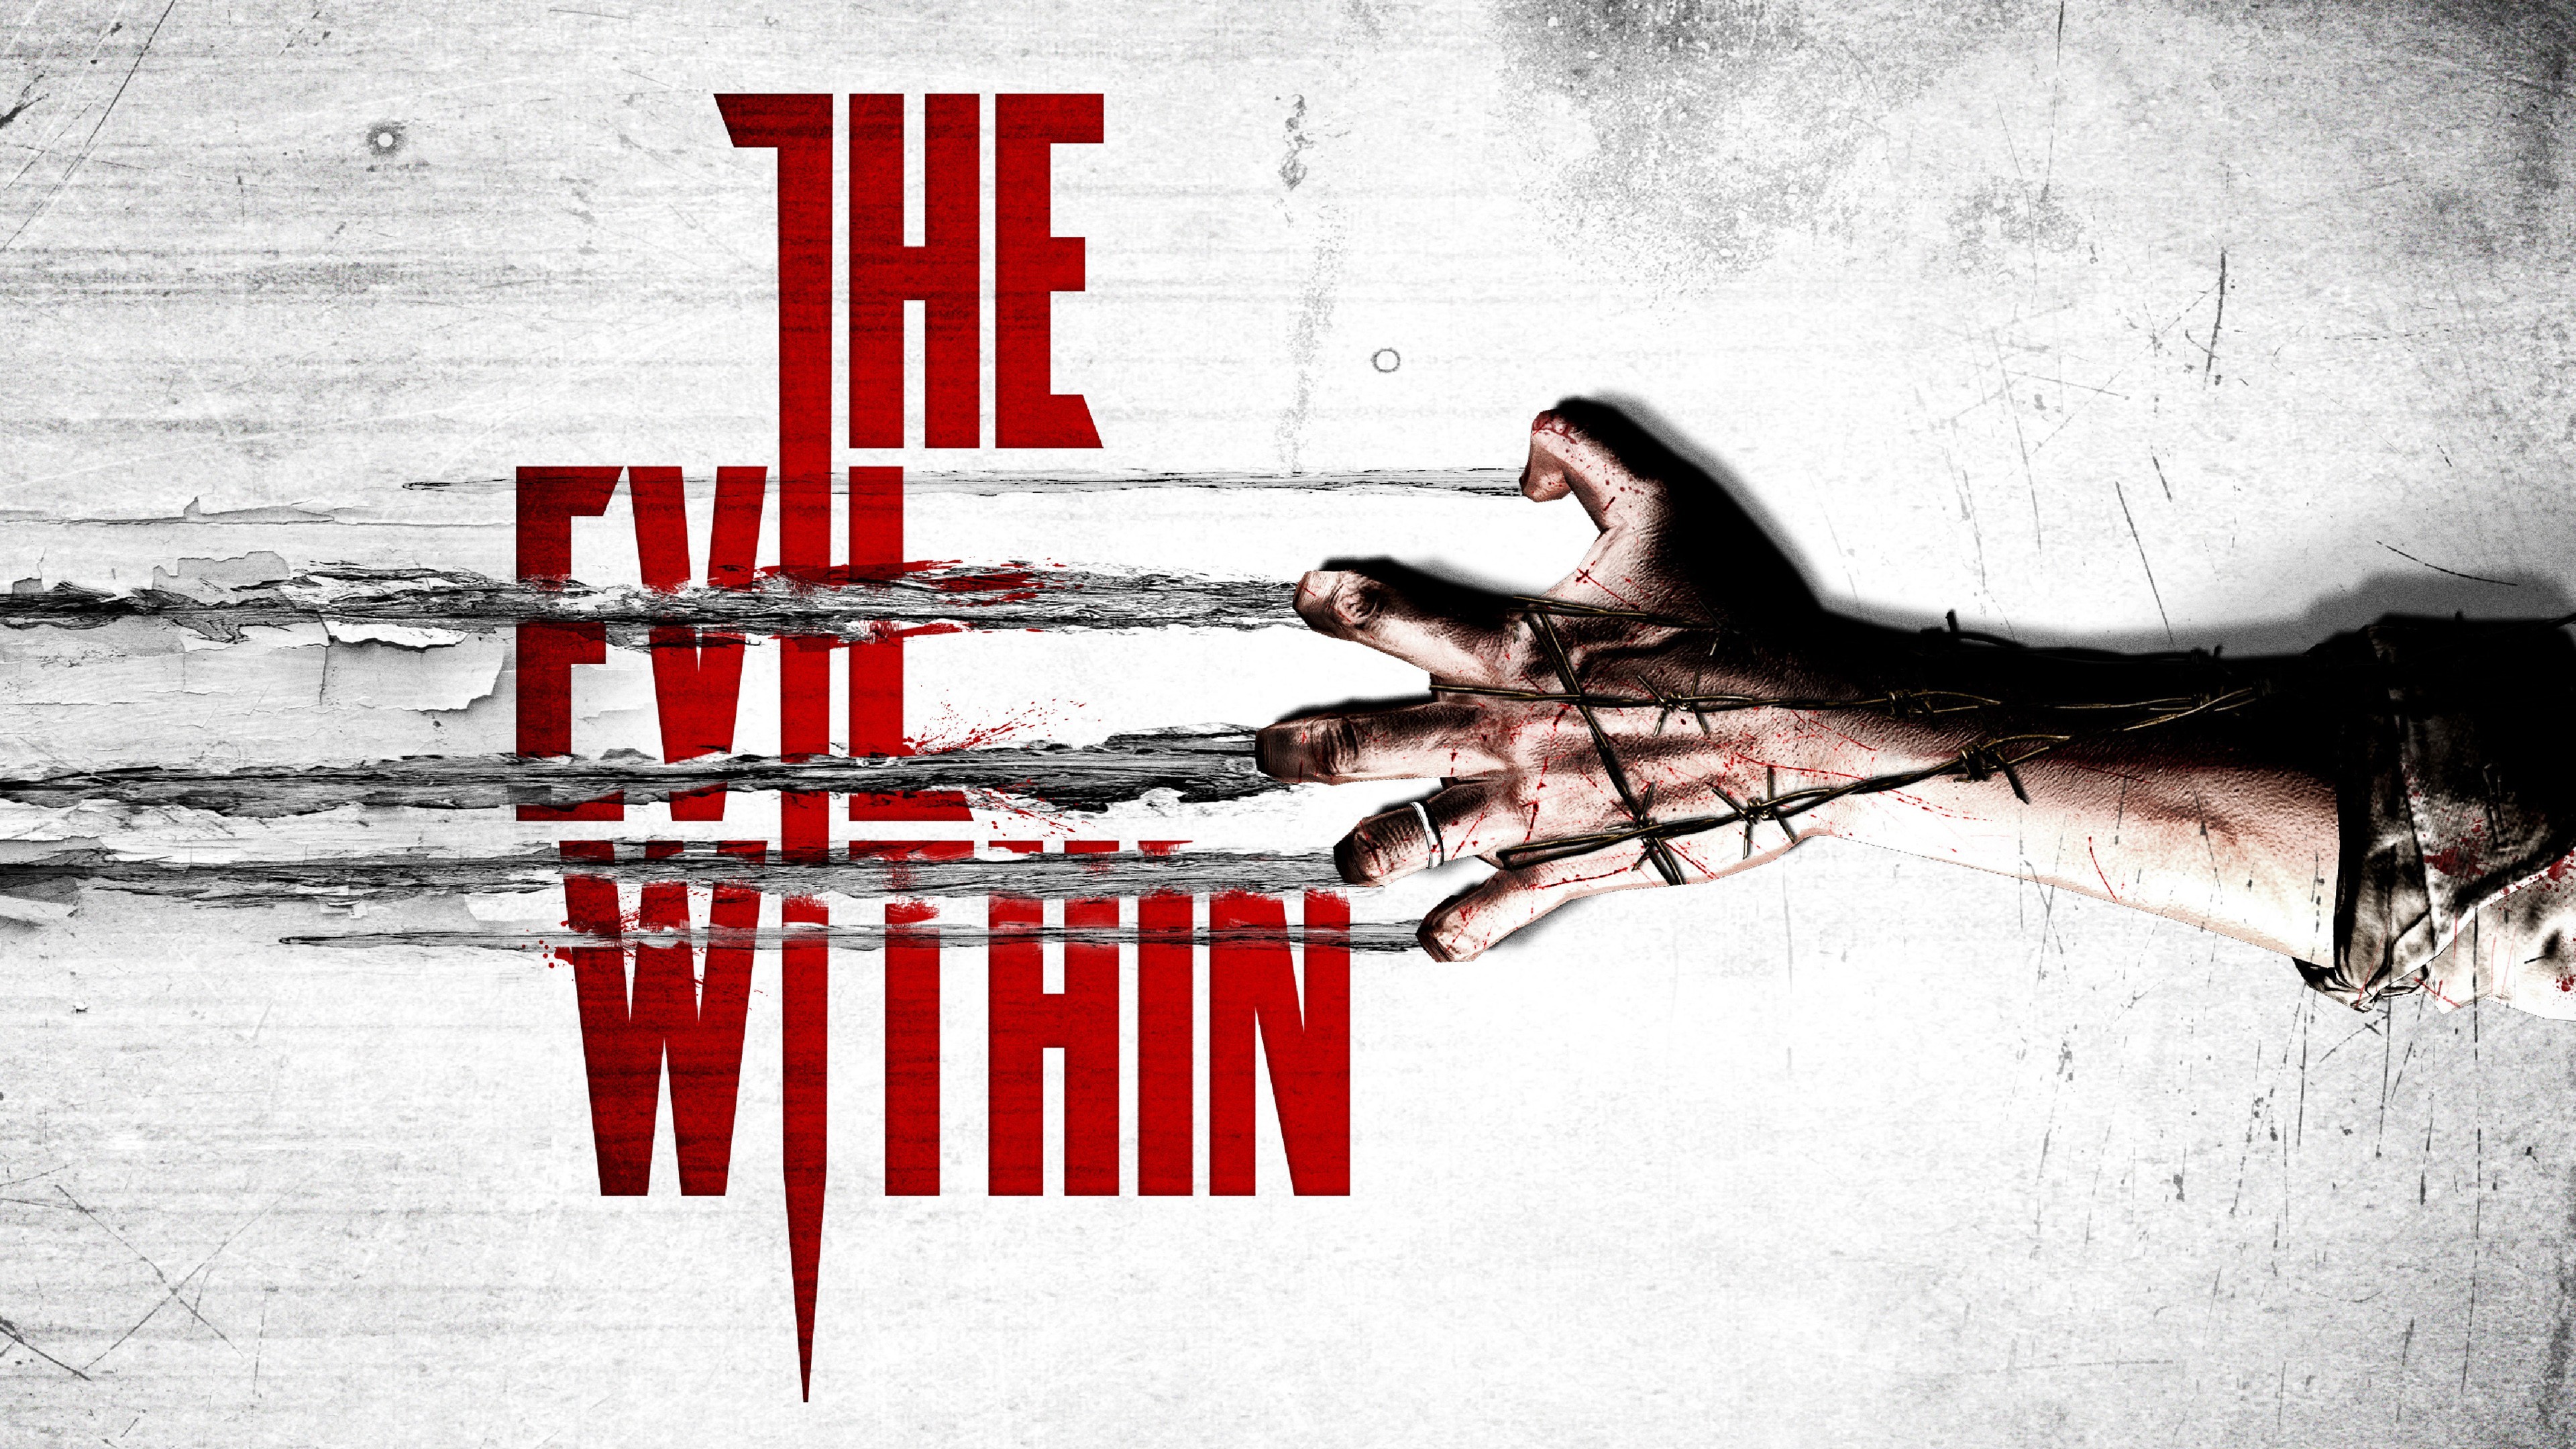 the_evil_within_2014_game-3840x2160.jpg